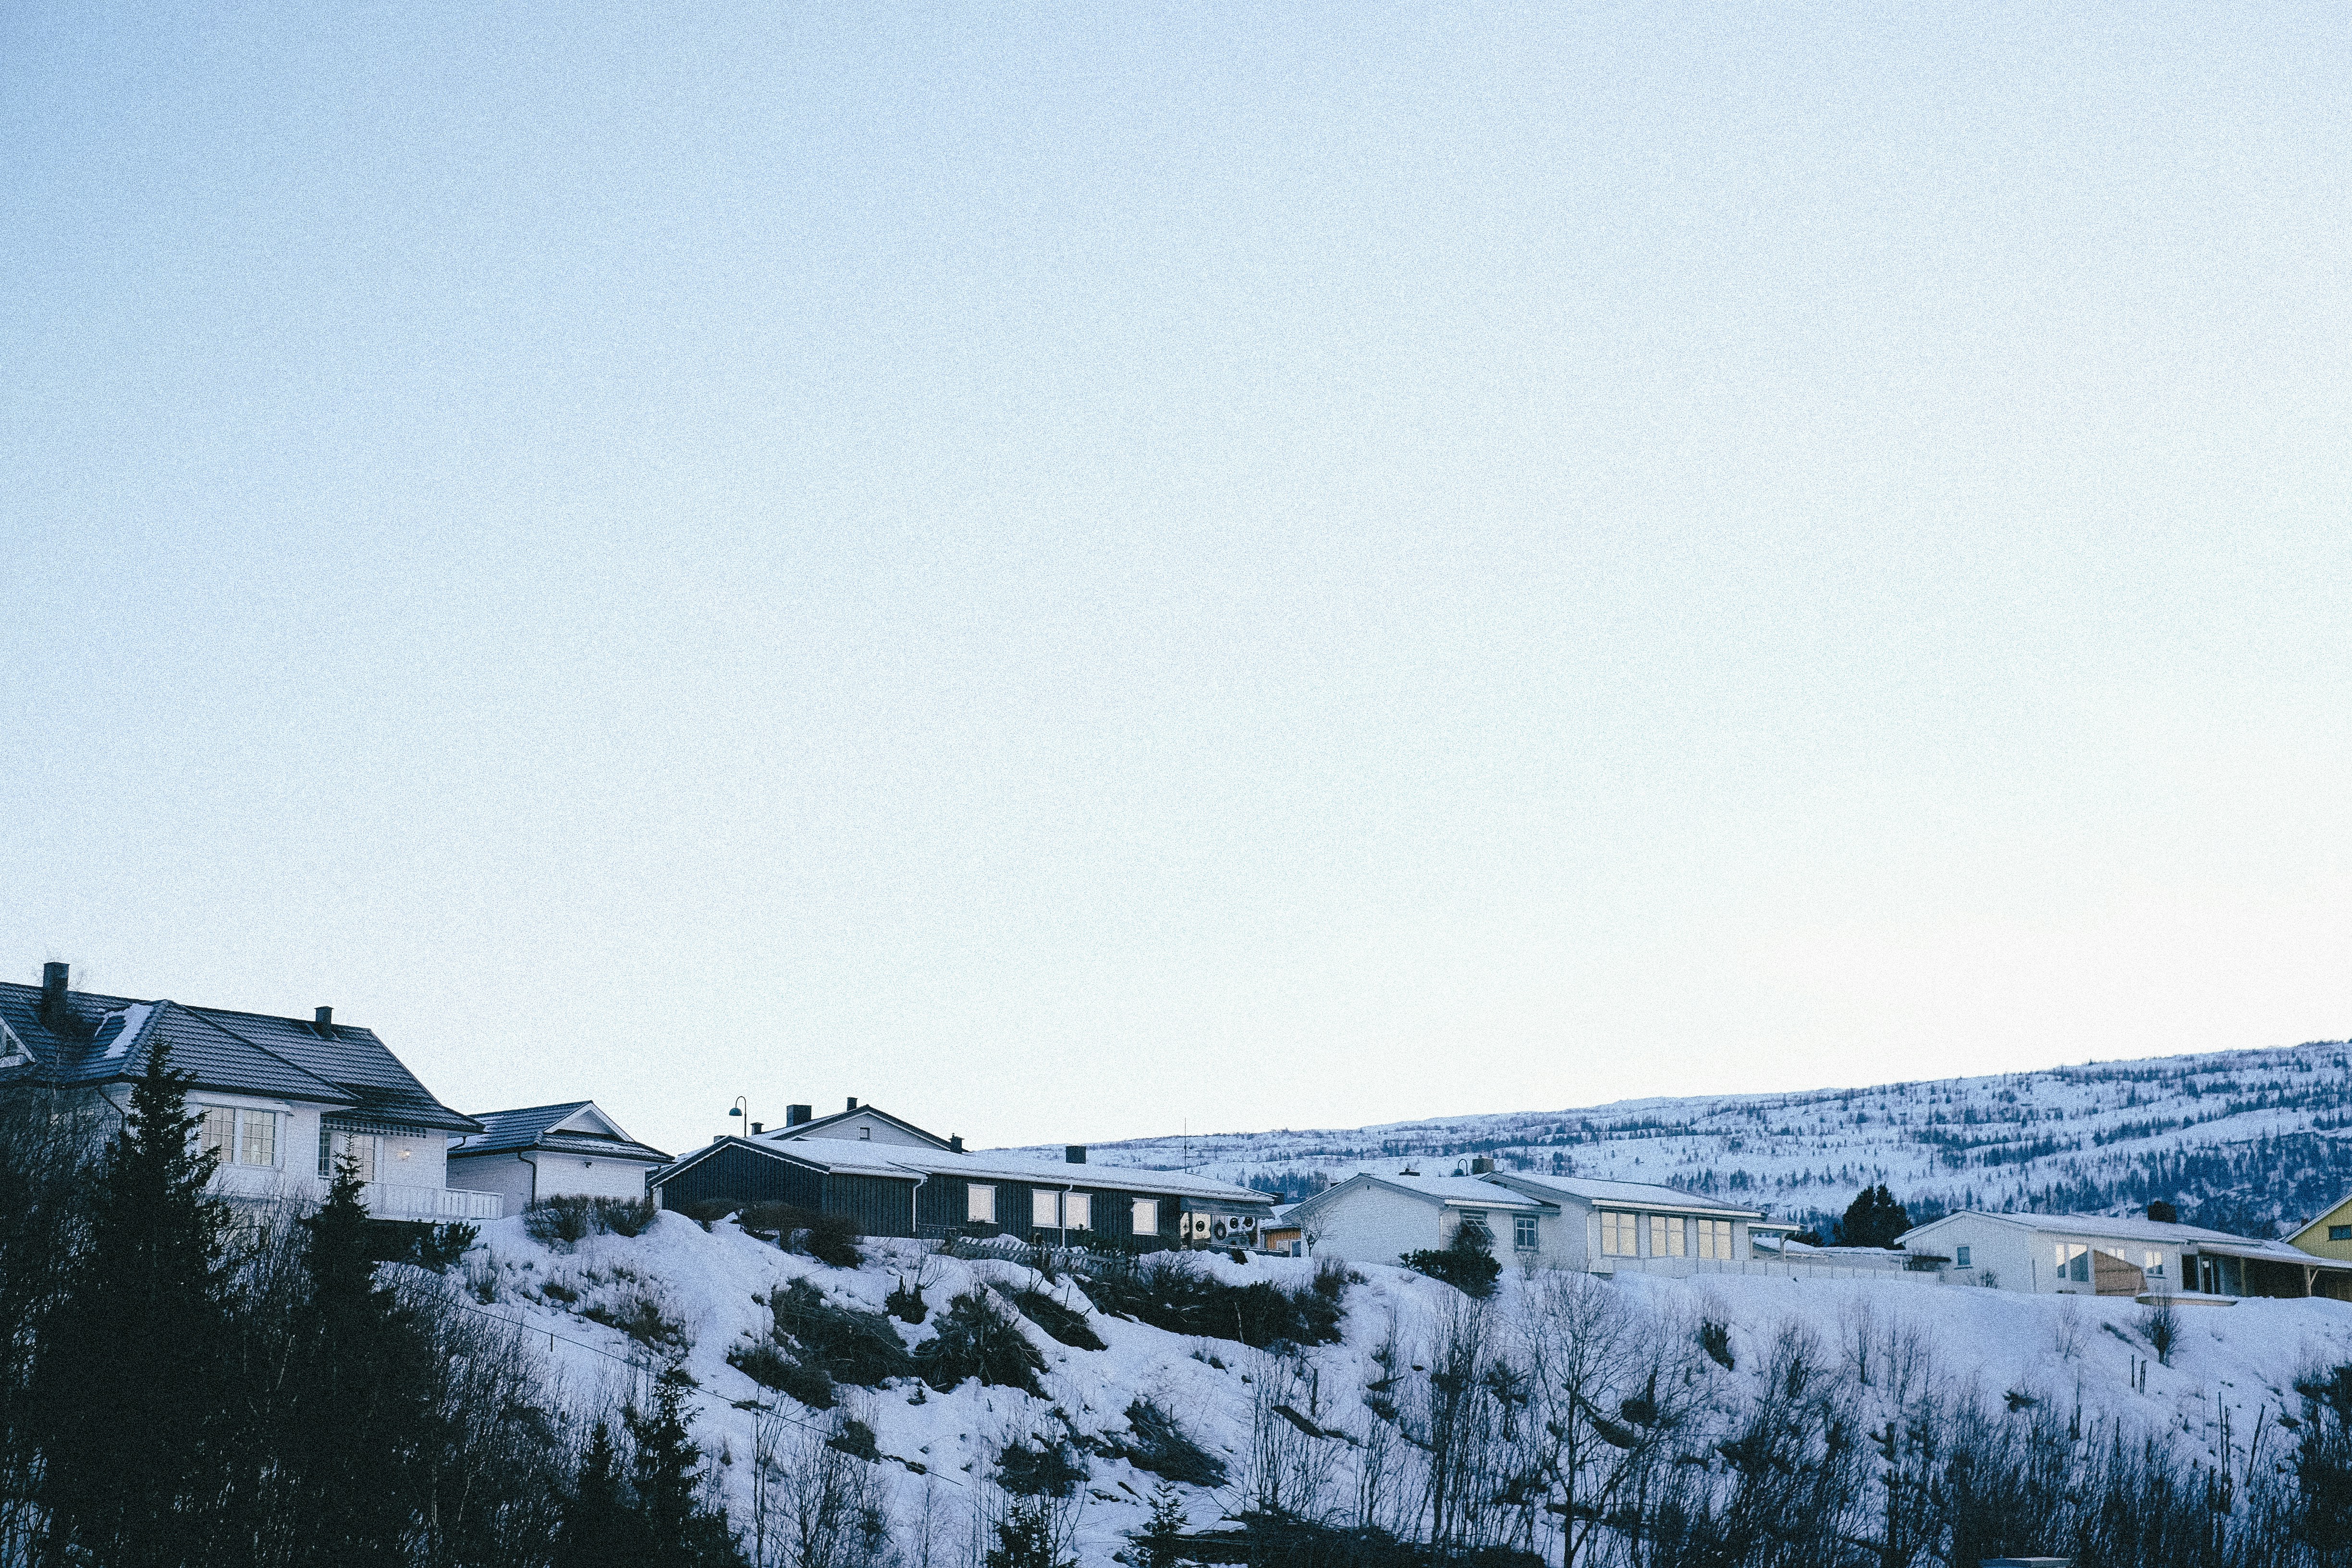 A beautiful winter wonderland scene of the homes on top of a hill covered in snow.